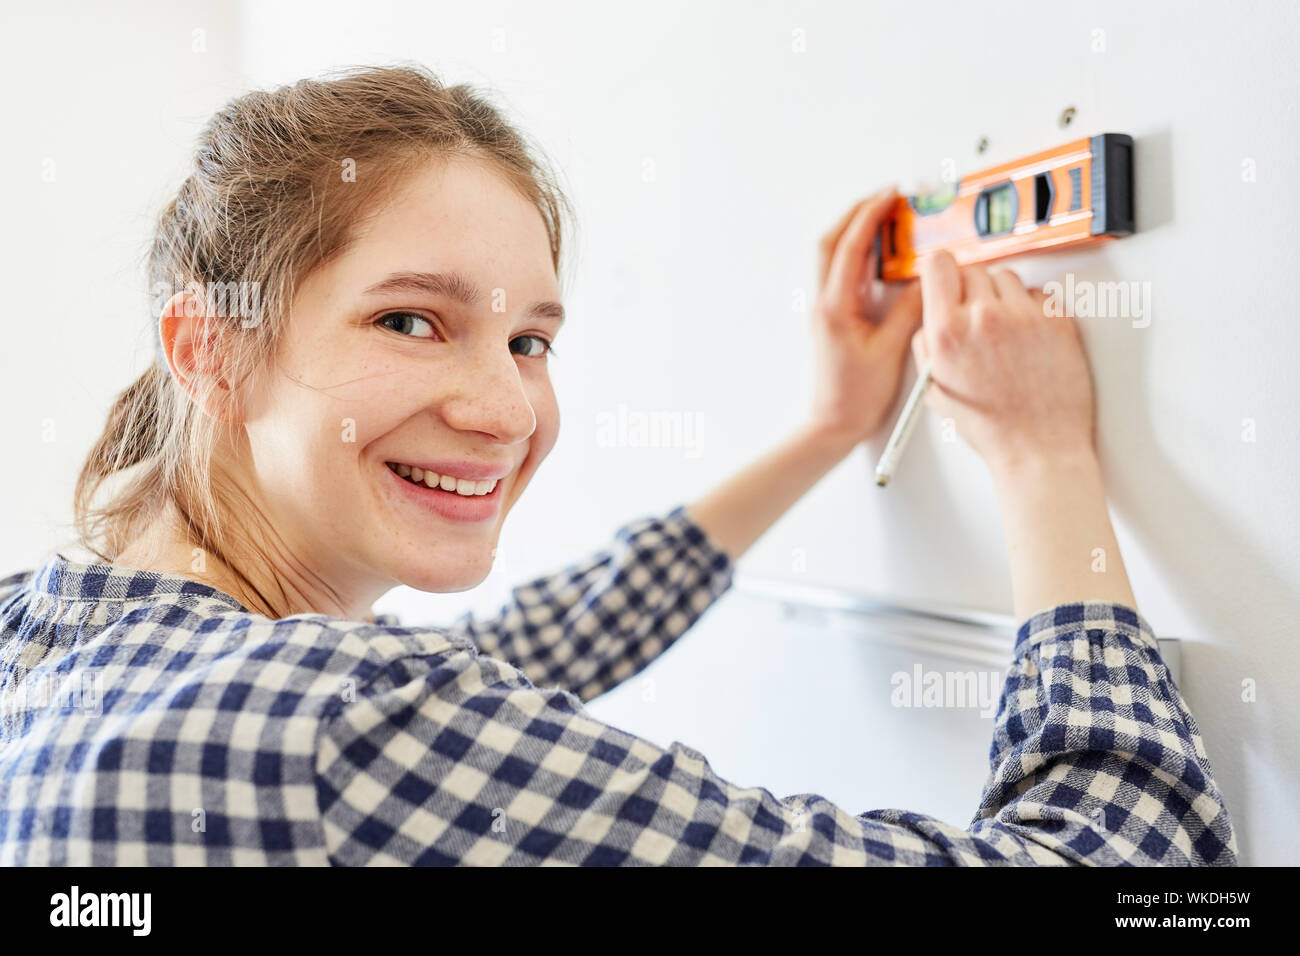 Young woman as DIY home improvement while measuring with the spirit level on the wall Stock Photo